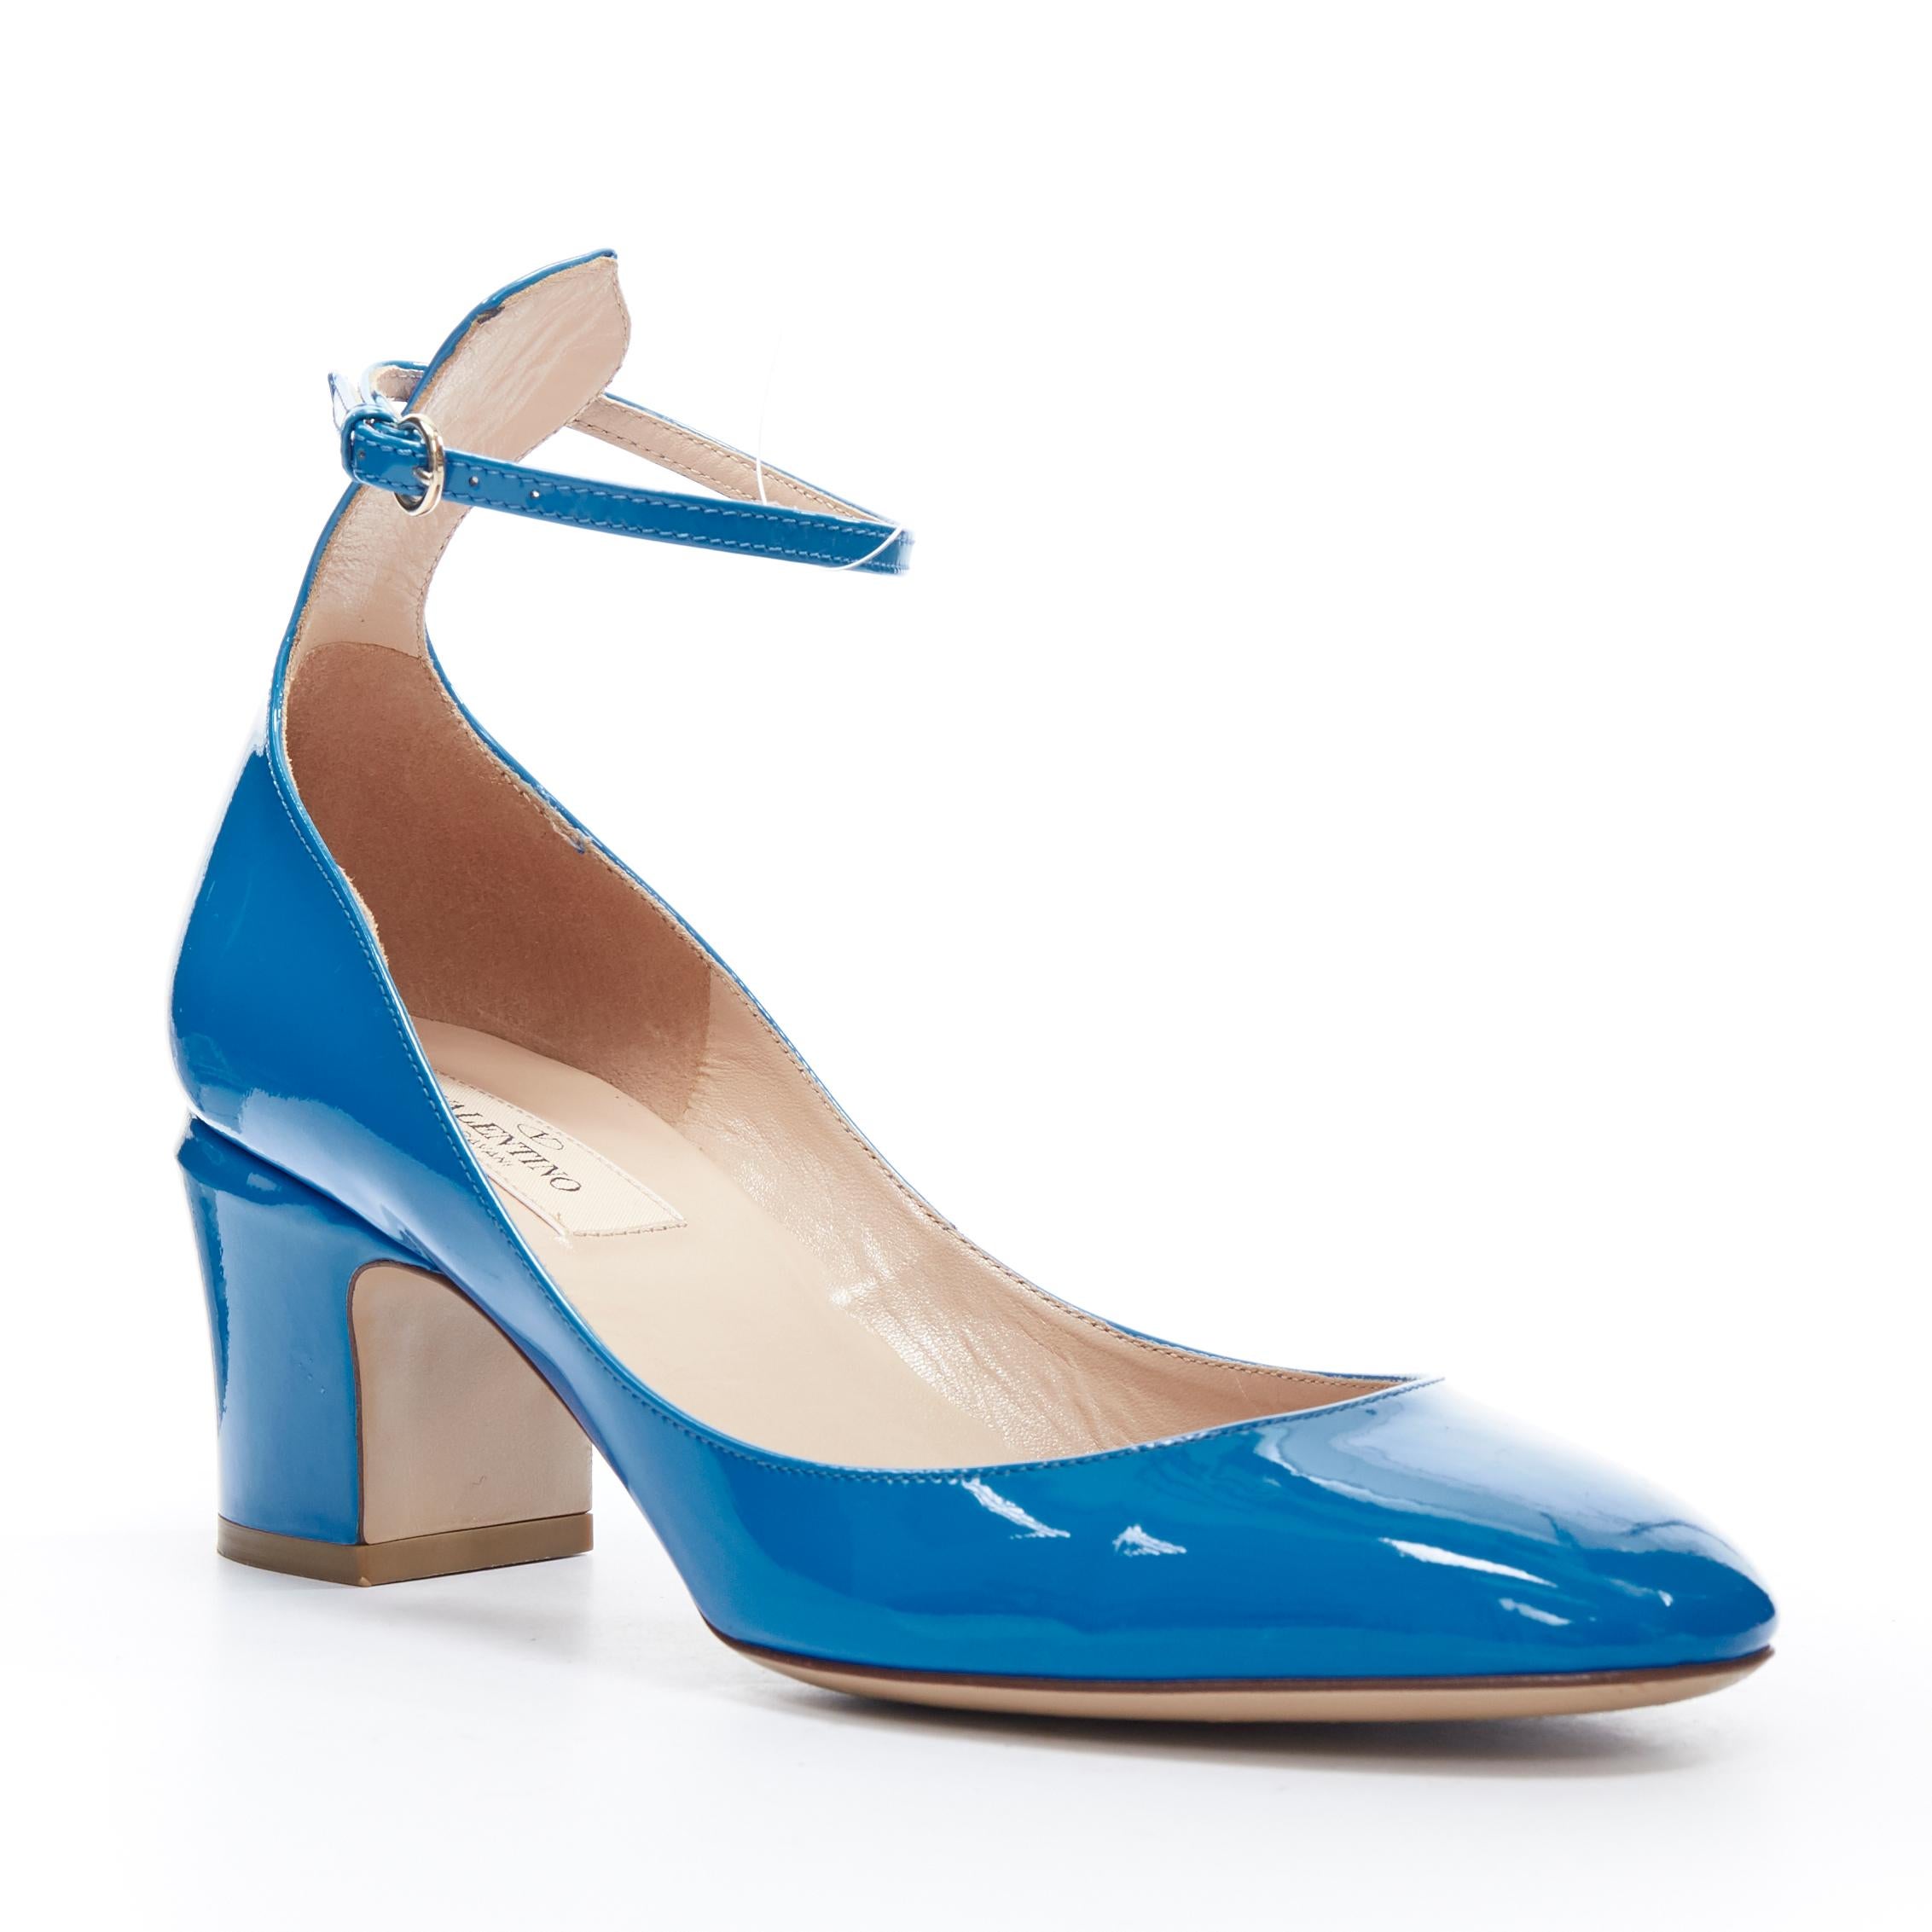 VALENTINO Tango blue patent leather round toe block heel ankle strap pump EU37.5 
Reference: LNKO/A01213 
Brand: Valentino 
Model: Tango 
Material: Patent leather 
Color: Blue 
Pattern: Solid 
Closure: Ankle Strap 
Extra Detail: Mid (22.9 in) heel